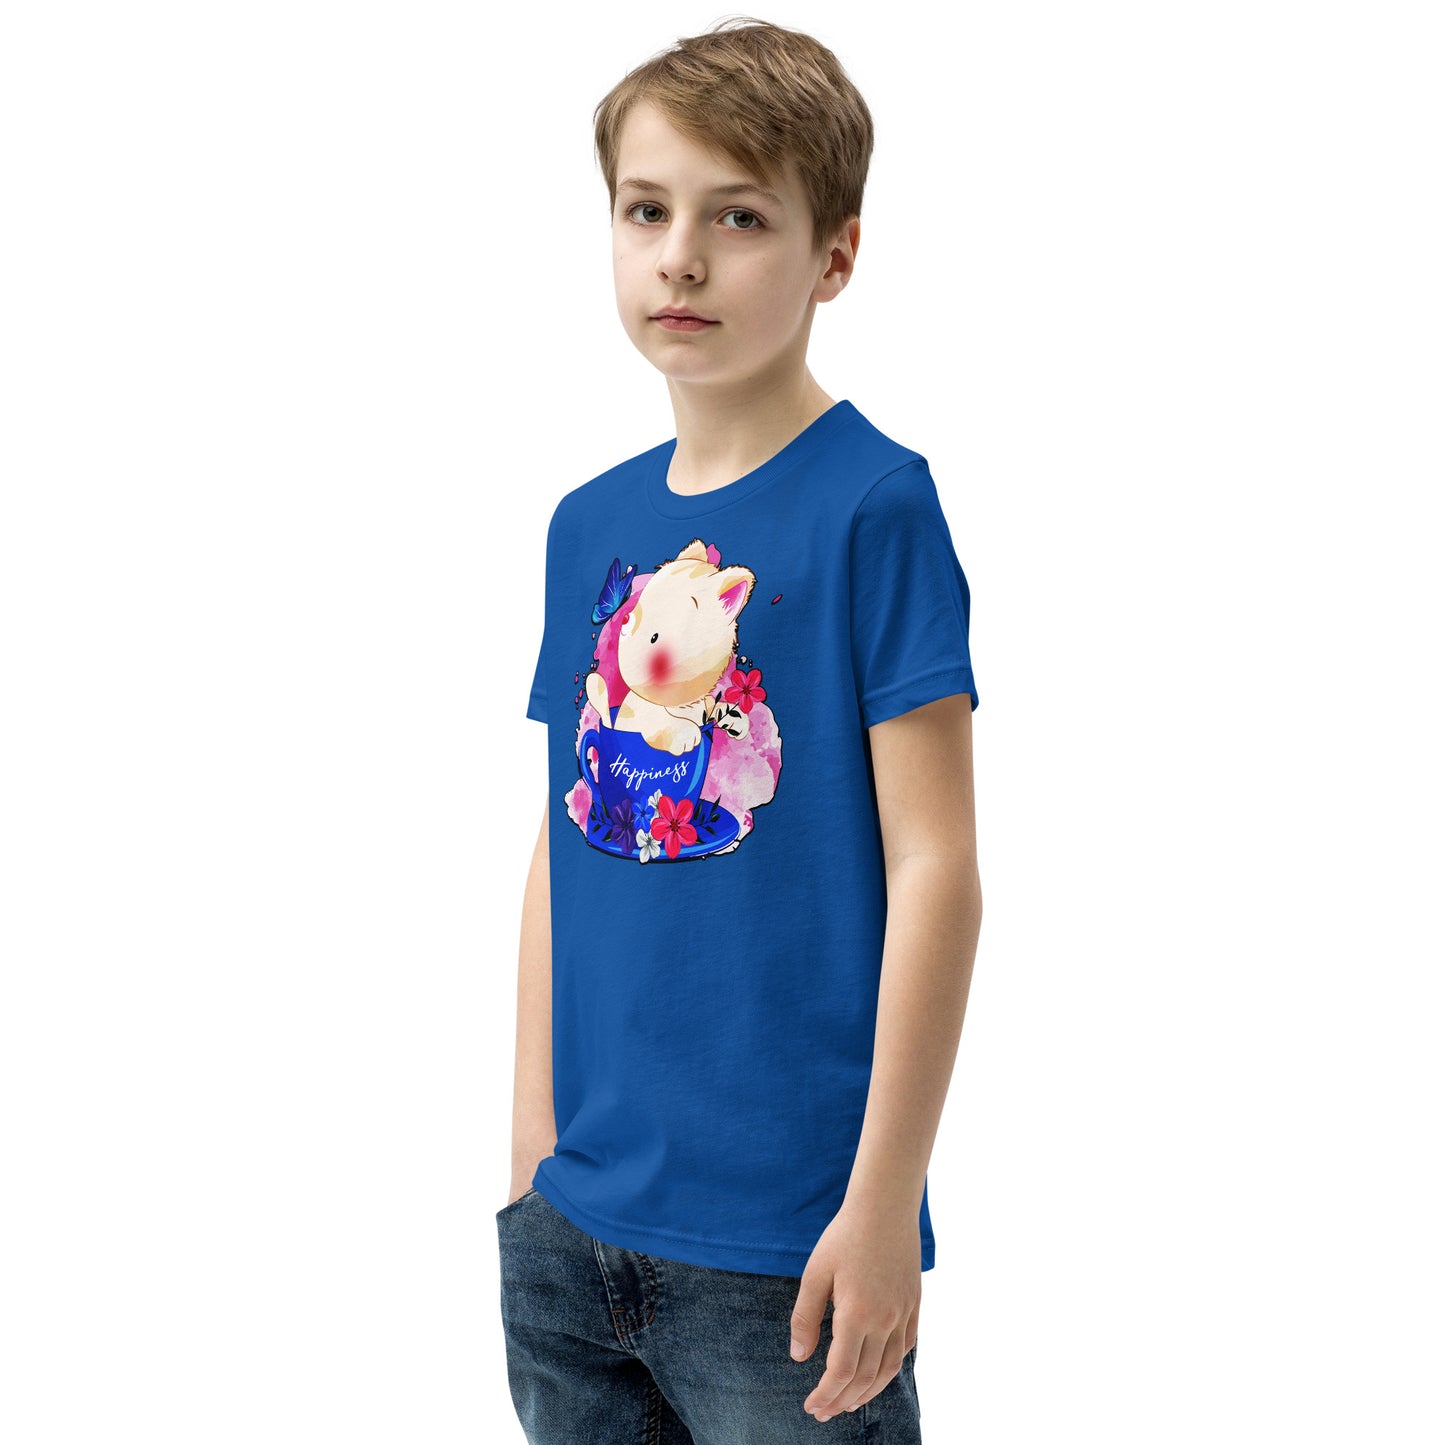 Cute Kitty Cat Playing with Butterfly T-shirt, No. 0321